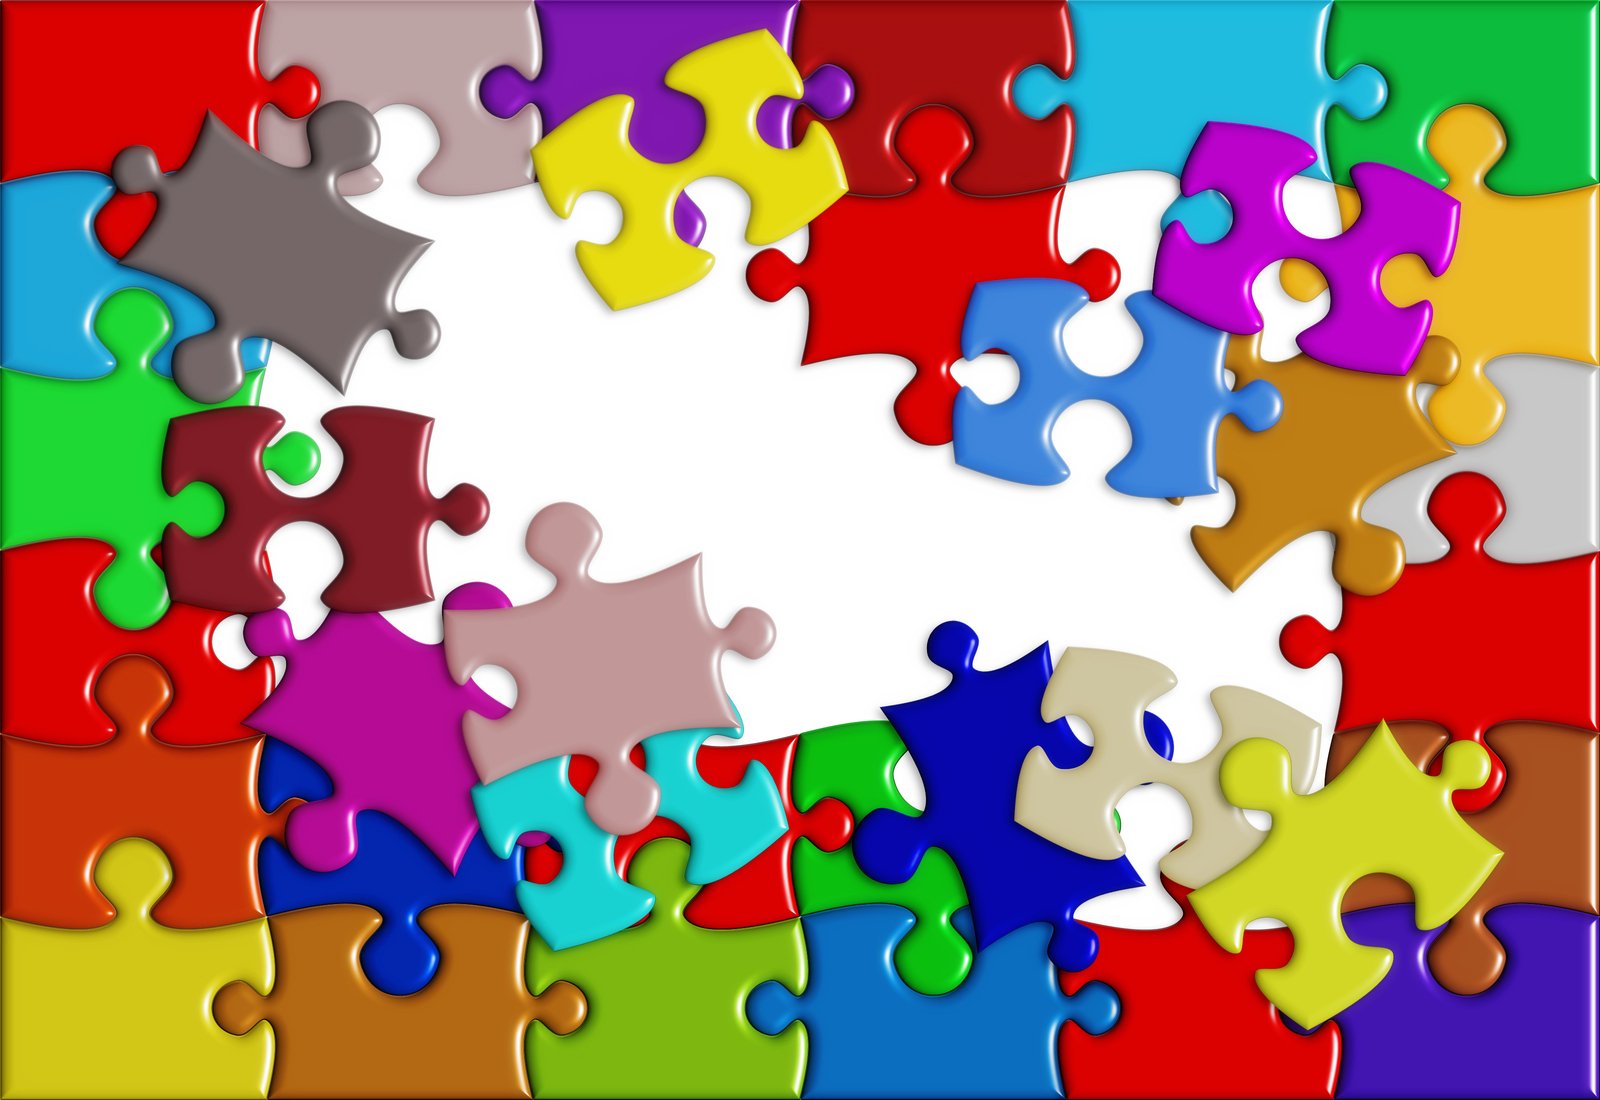 a colorful jigsaw pattern with some missing pieces